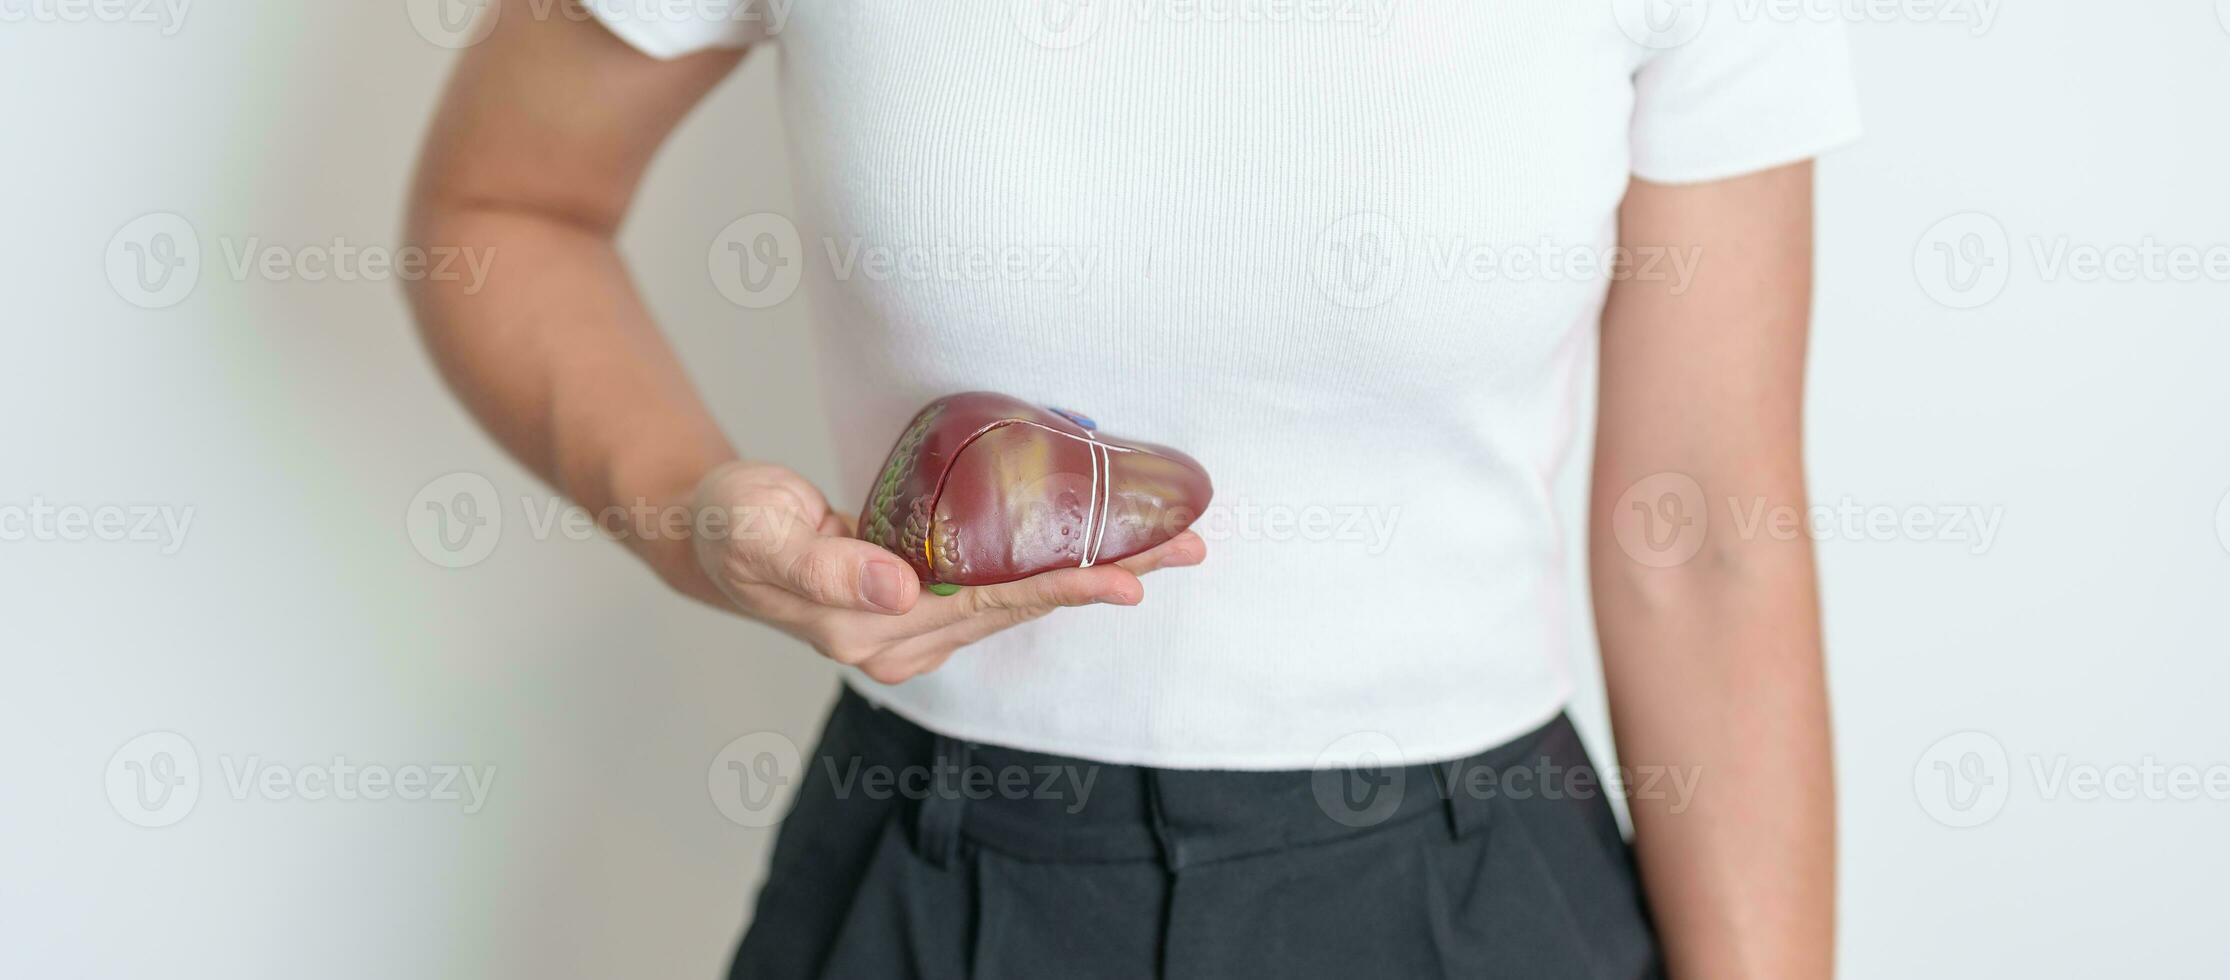 Woman holding human Liver anatomy model. Liver cancer and Tumor, Jaundice, Viral Hepatitis A, B, C, D, E, Cirrhosis, Failure, Enlarged, Hepatic Encephalopathy, Ascites Fluid in Belly and health photo